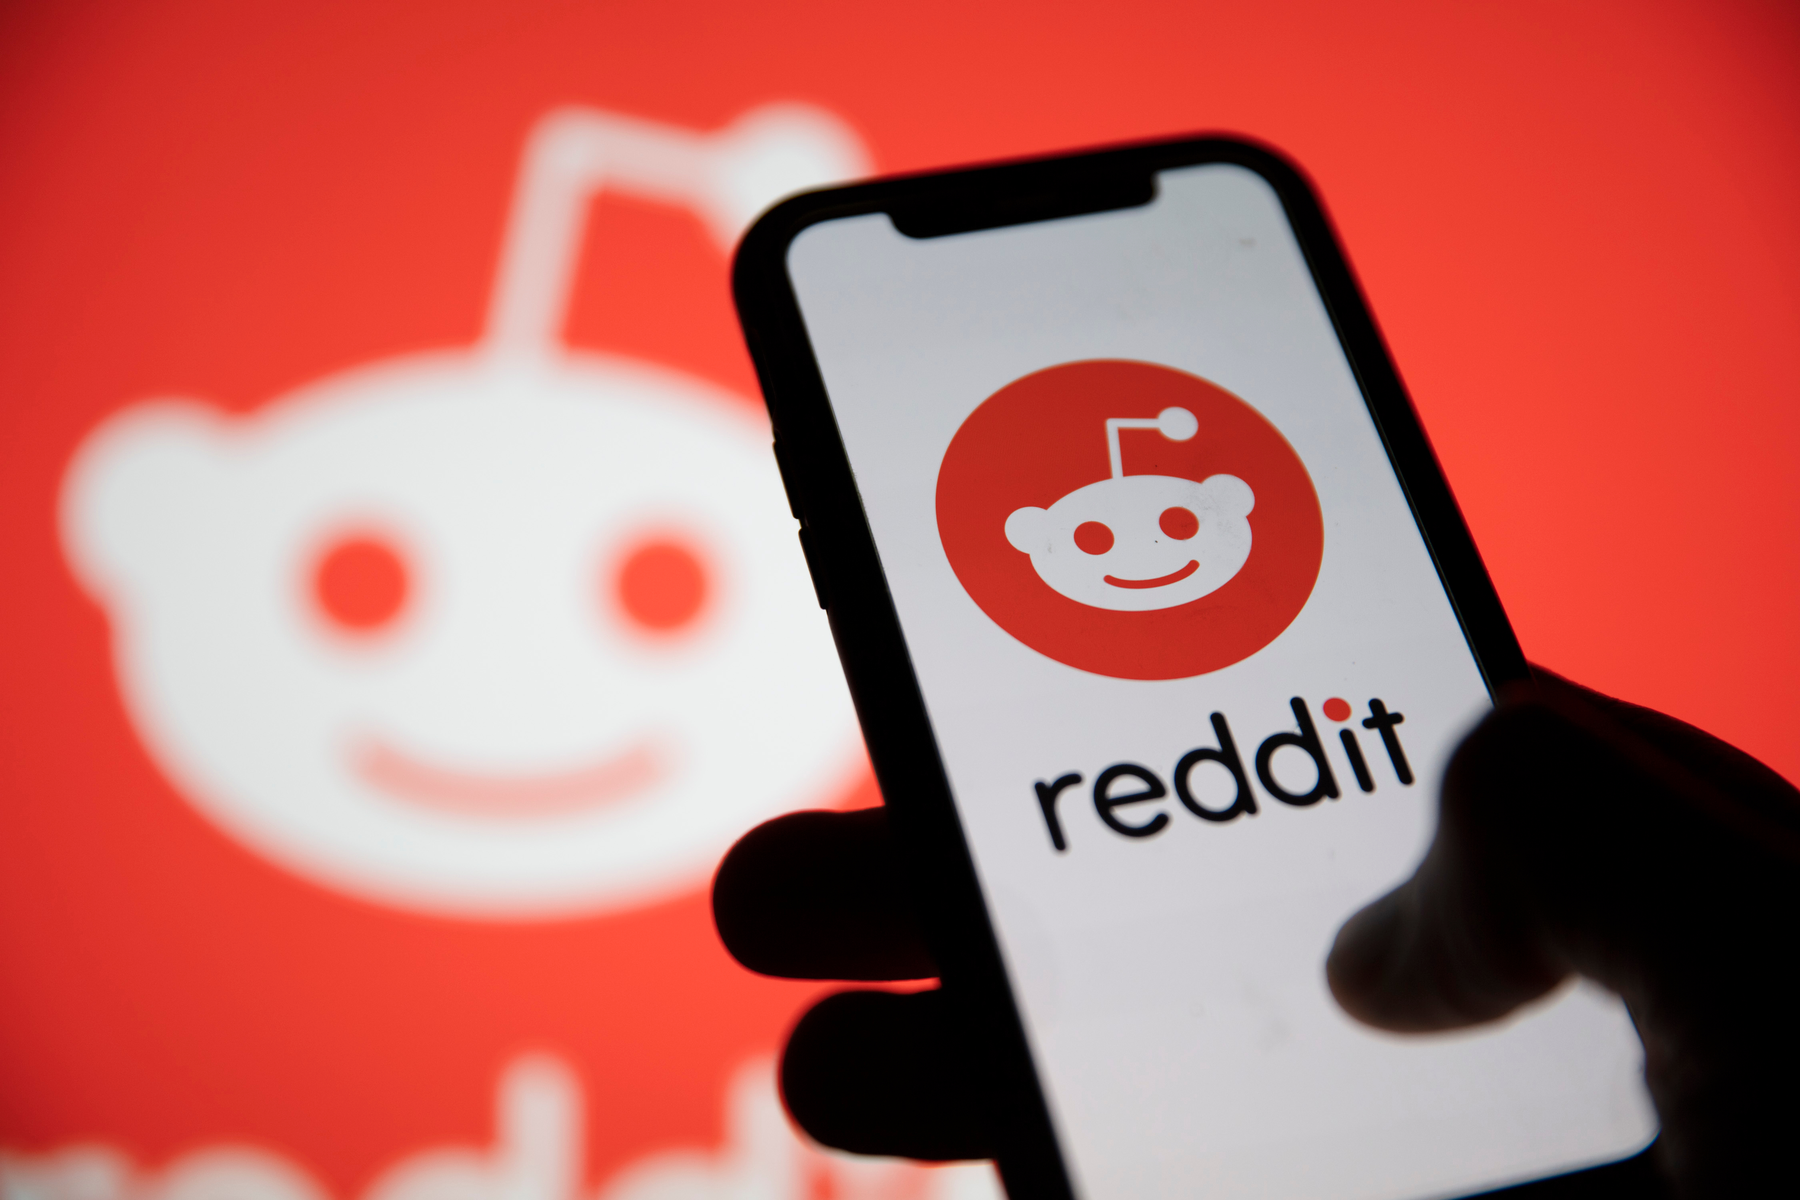 Image of Reddit on an iphone with a Reddit banner behind.